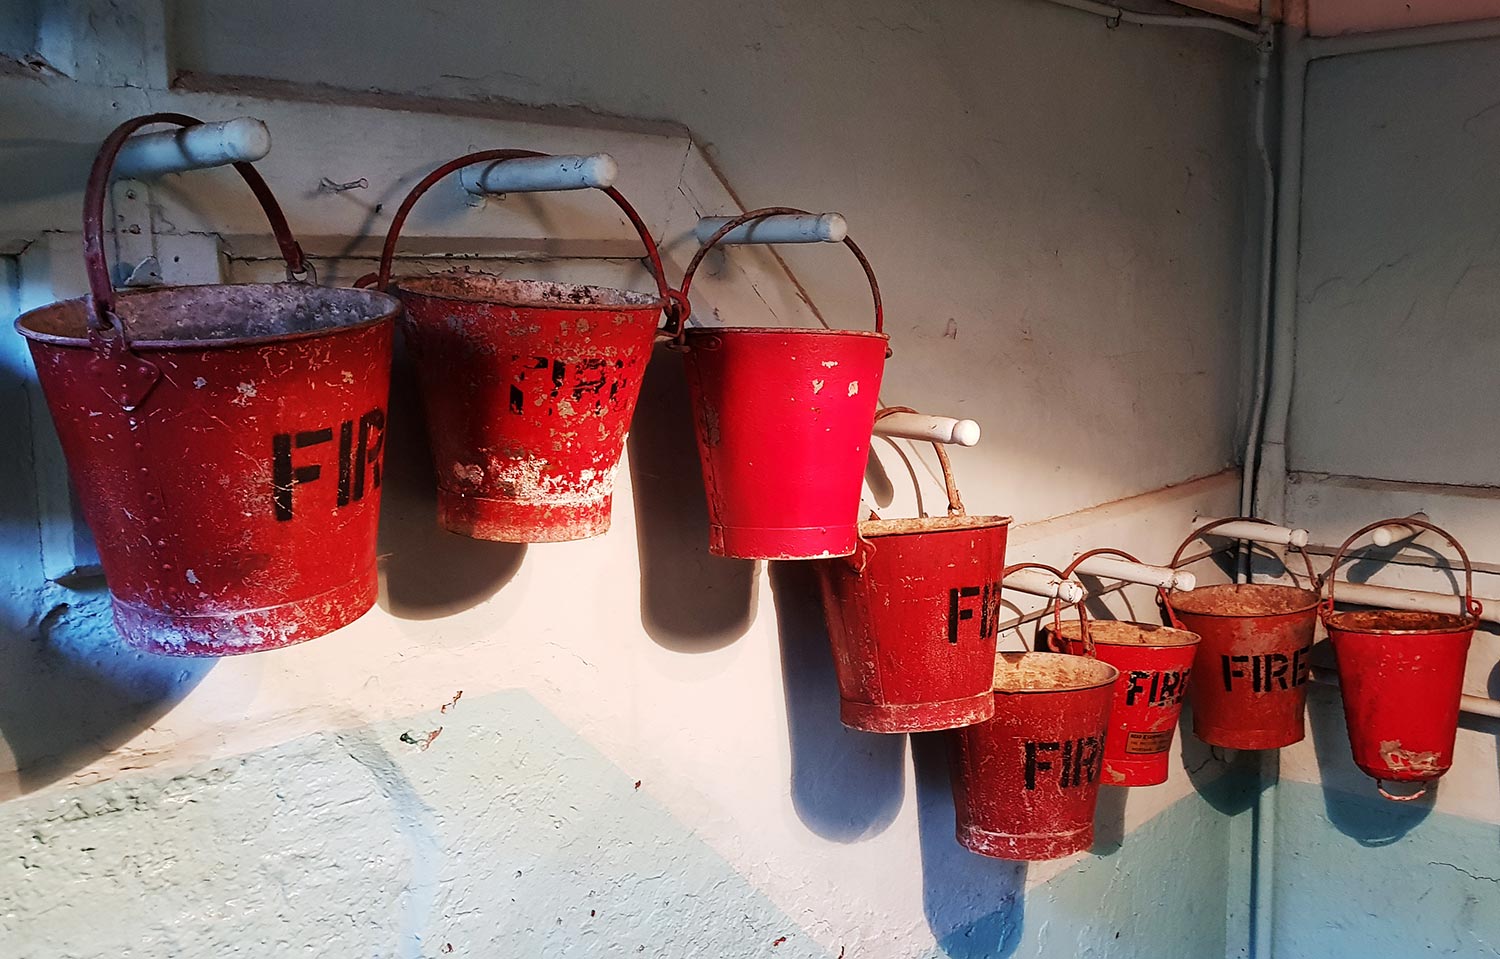 A row of old red fire buckets hanging on the wall in a stairwell